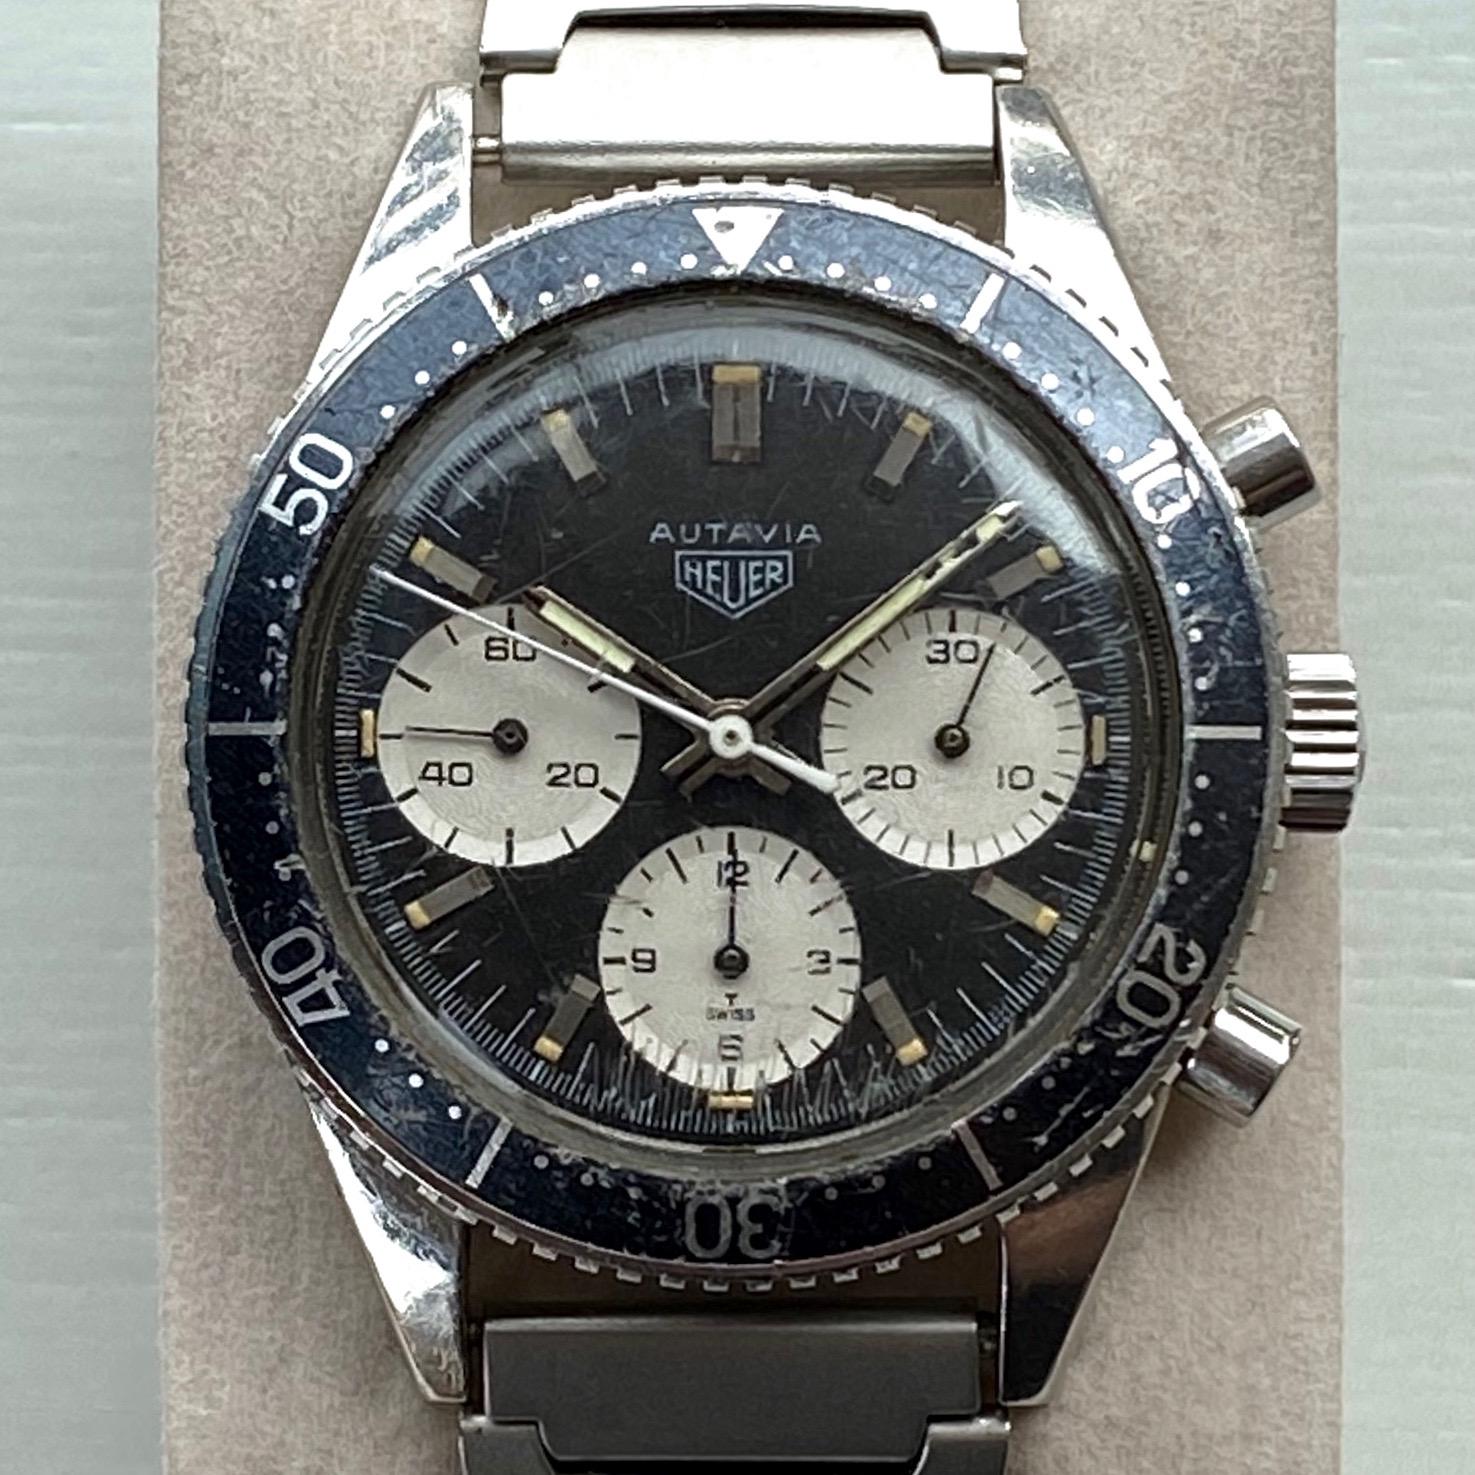 A super rare and highly sought after 1966 Heuer Autavia 2446M Transitional chronograph watch with 3rd execution dial and vintage stainless steel bracelet.

Formally identified in 2013, the intriguingly enigmatic Autavia 2446 Transitional was only